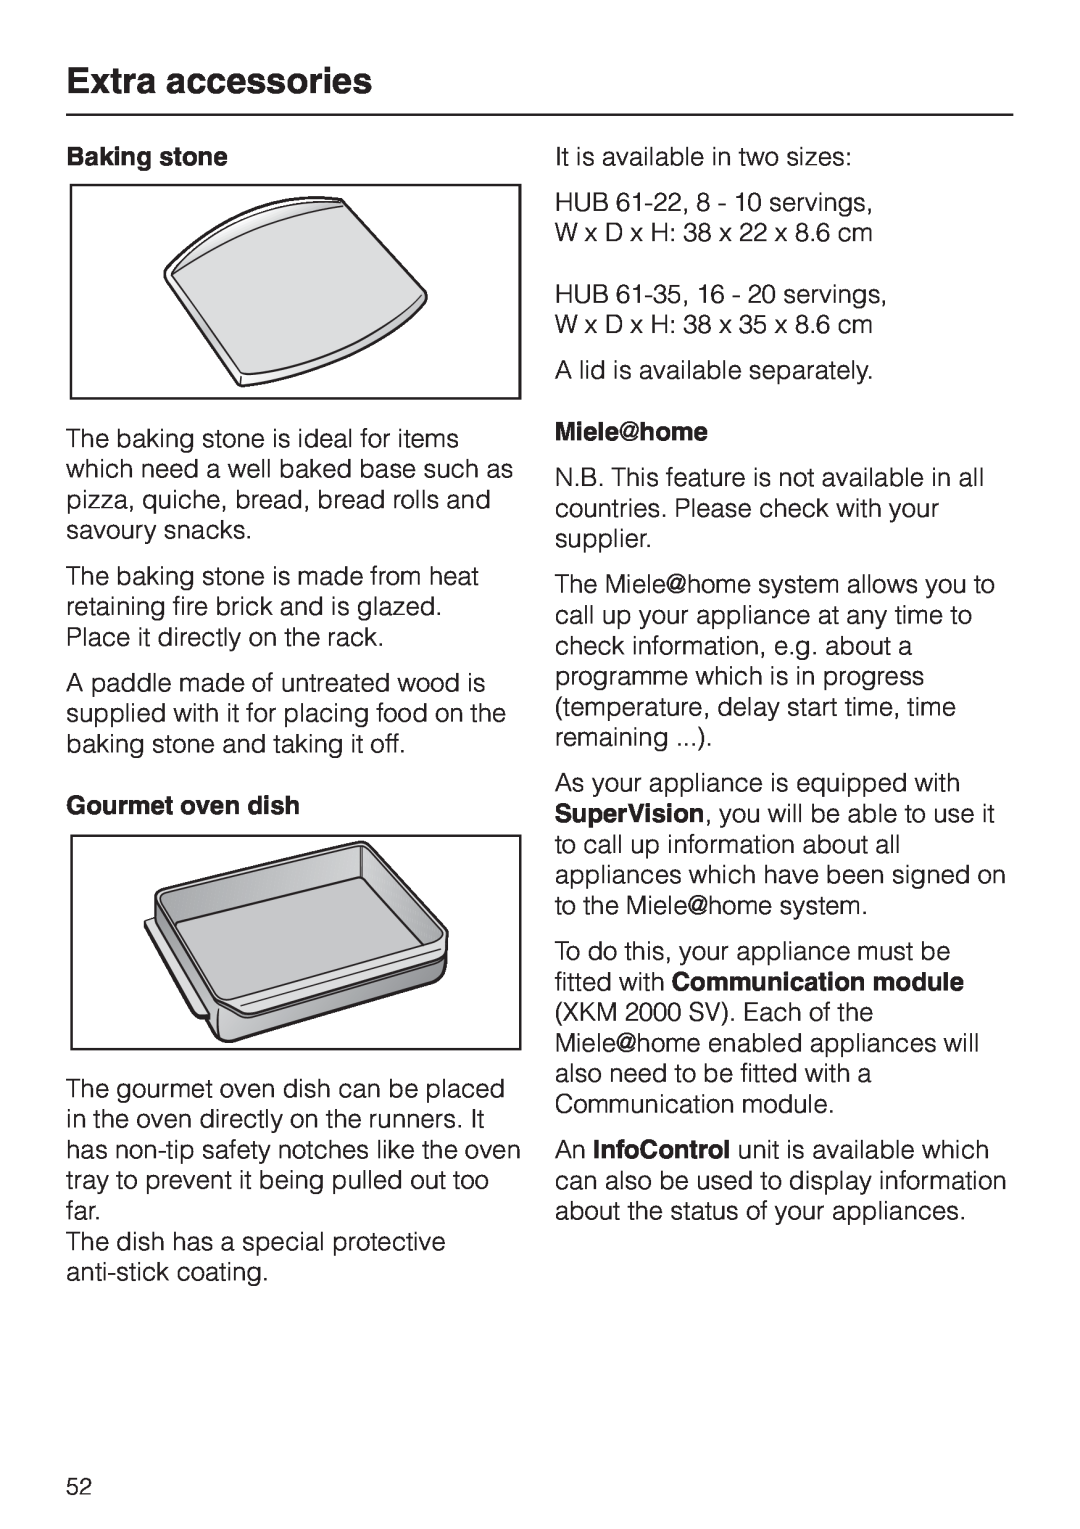 Miele H 4681 installation instructions Baking stone, Gourmet oven dish, Miele|home, Extra accessories 